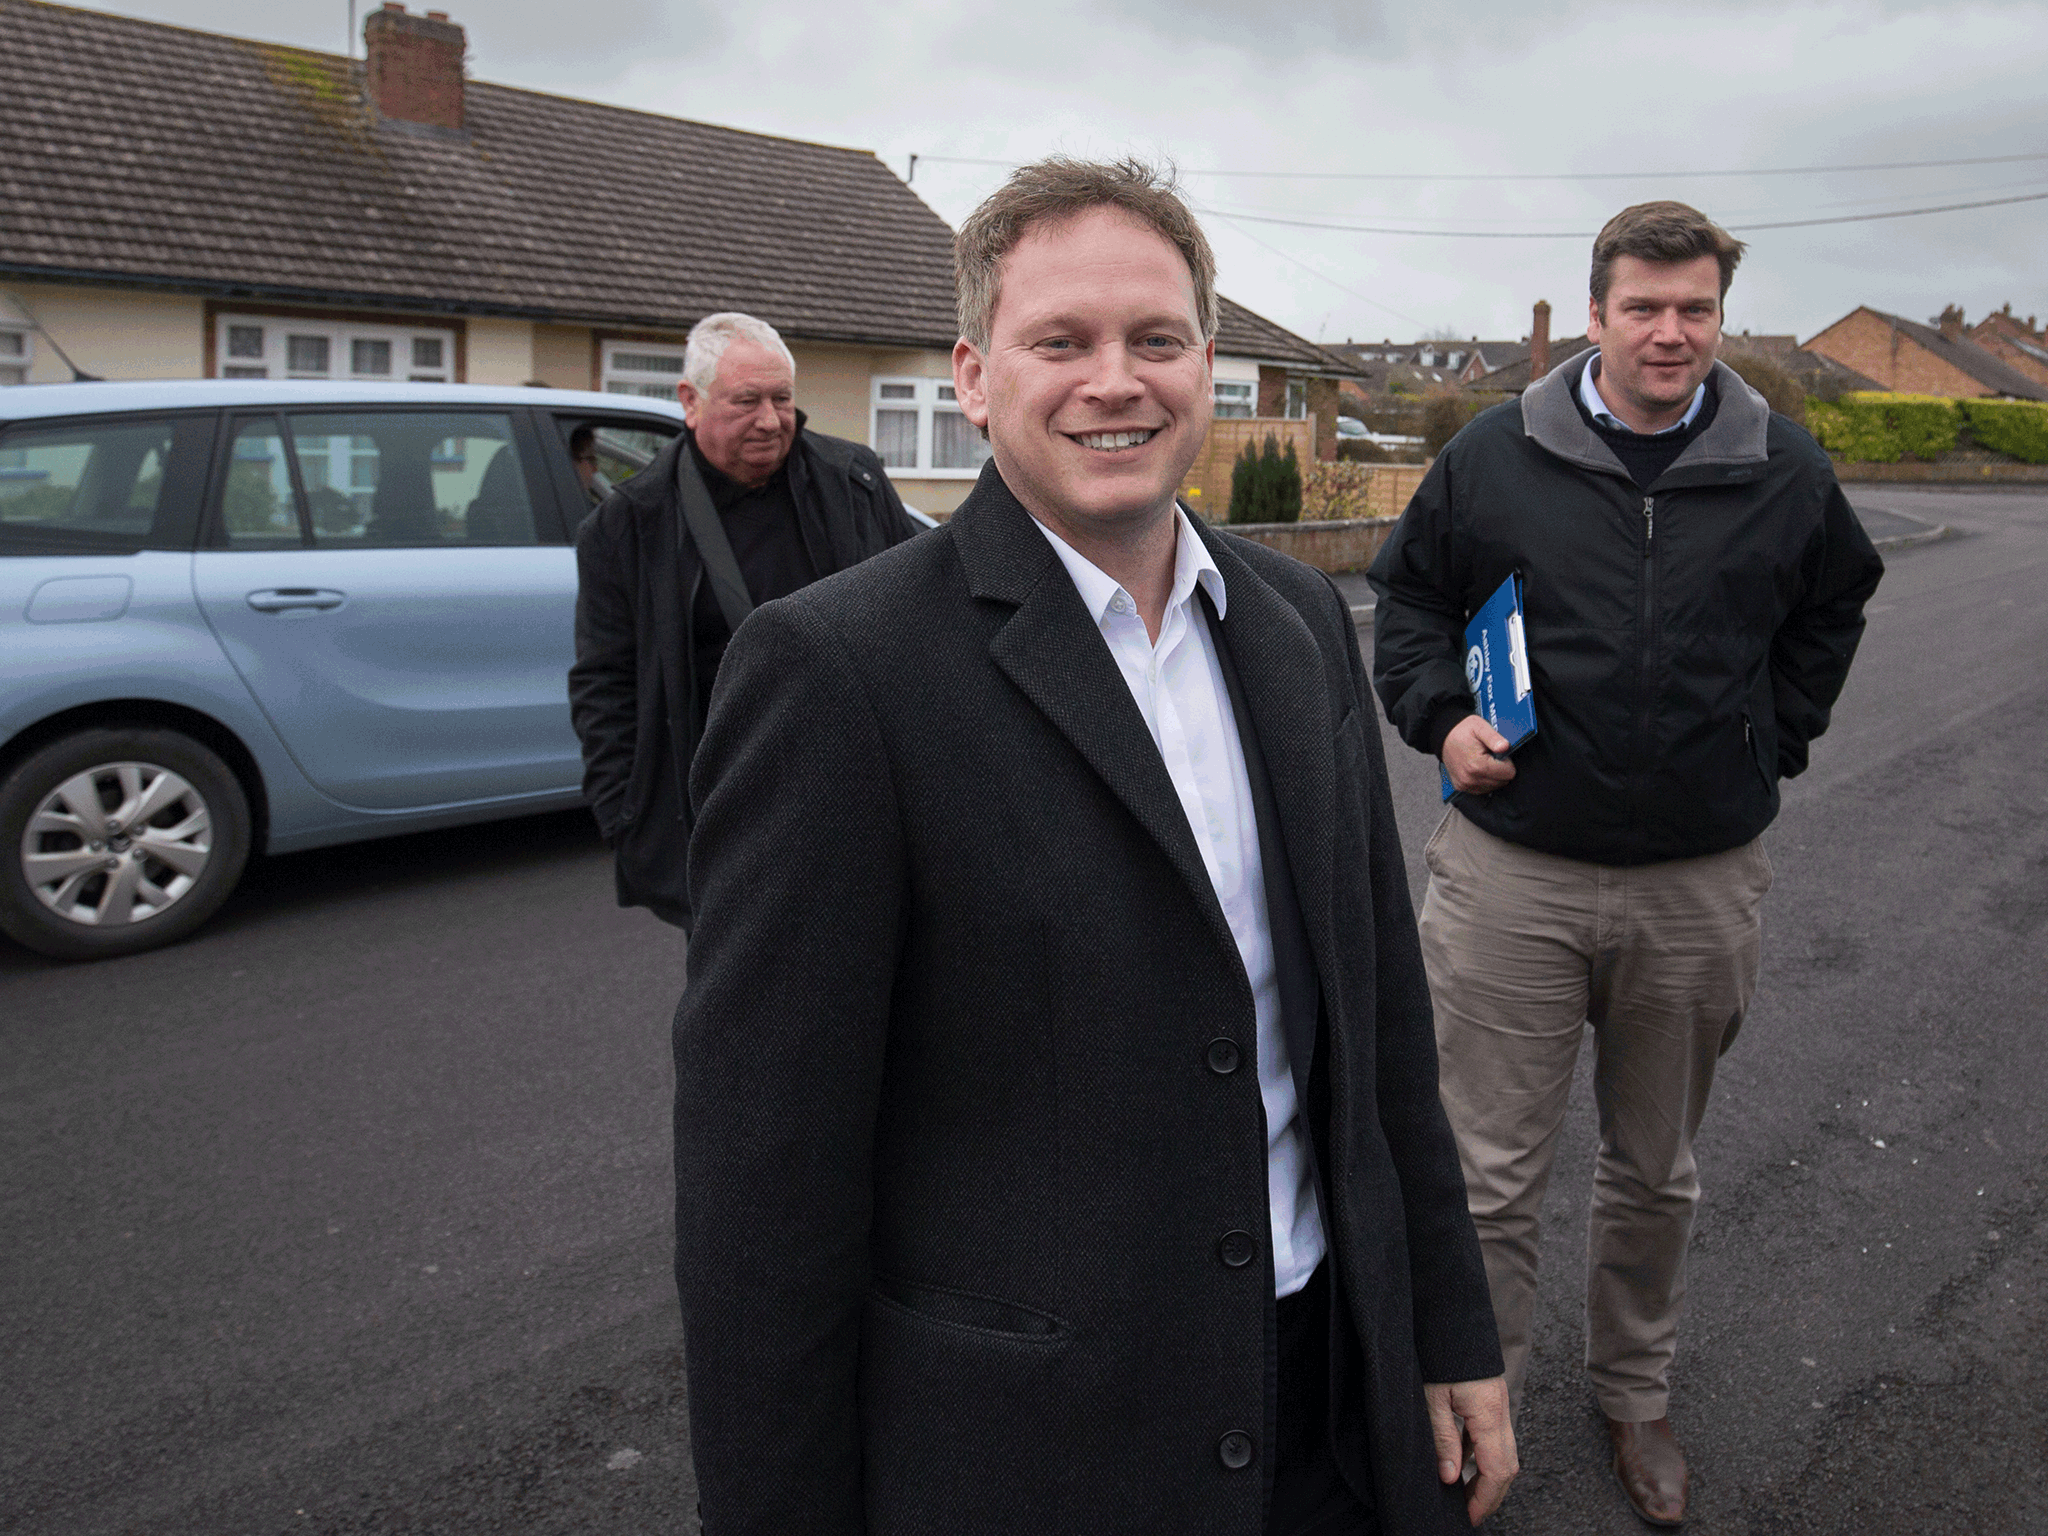 Grant Shapps was the Conservative Party Chairman from 2012 to 2015